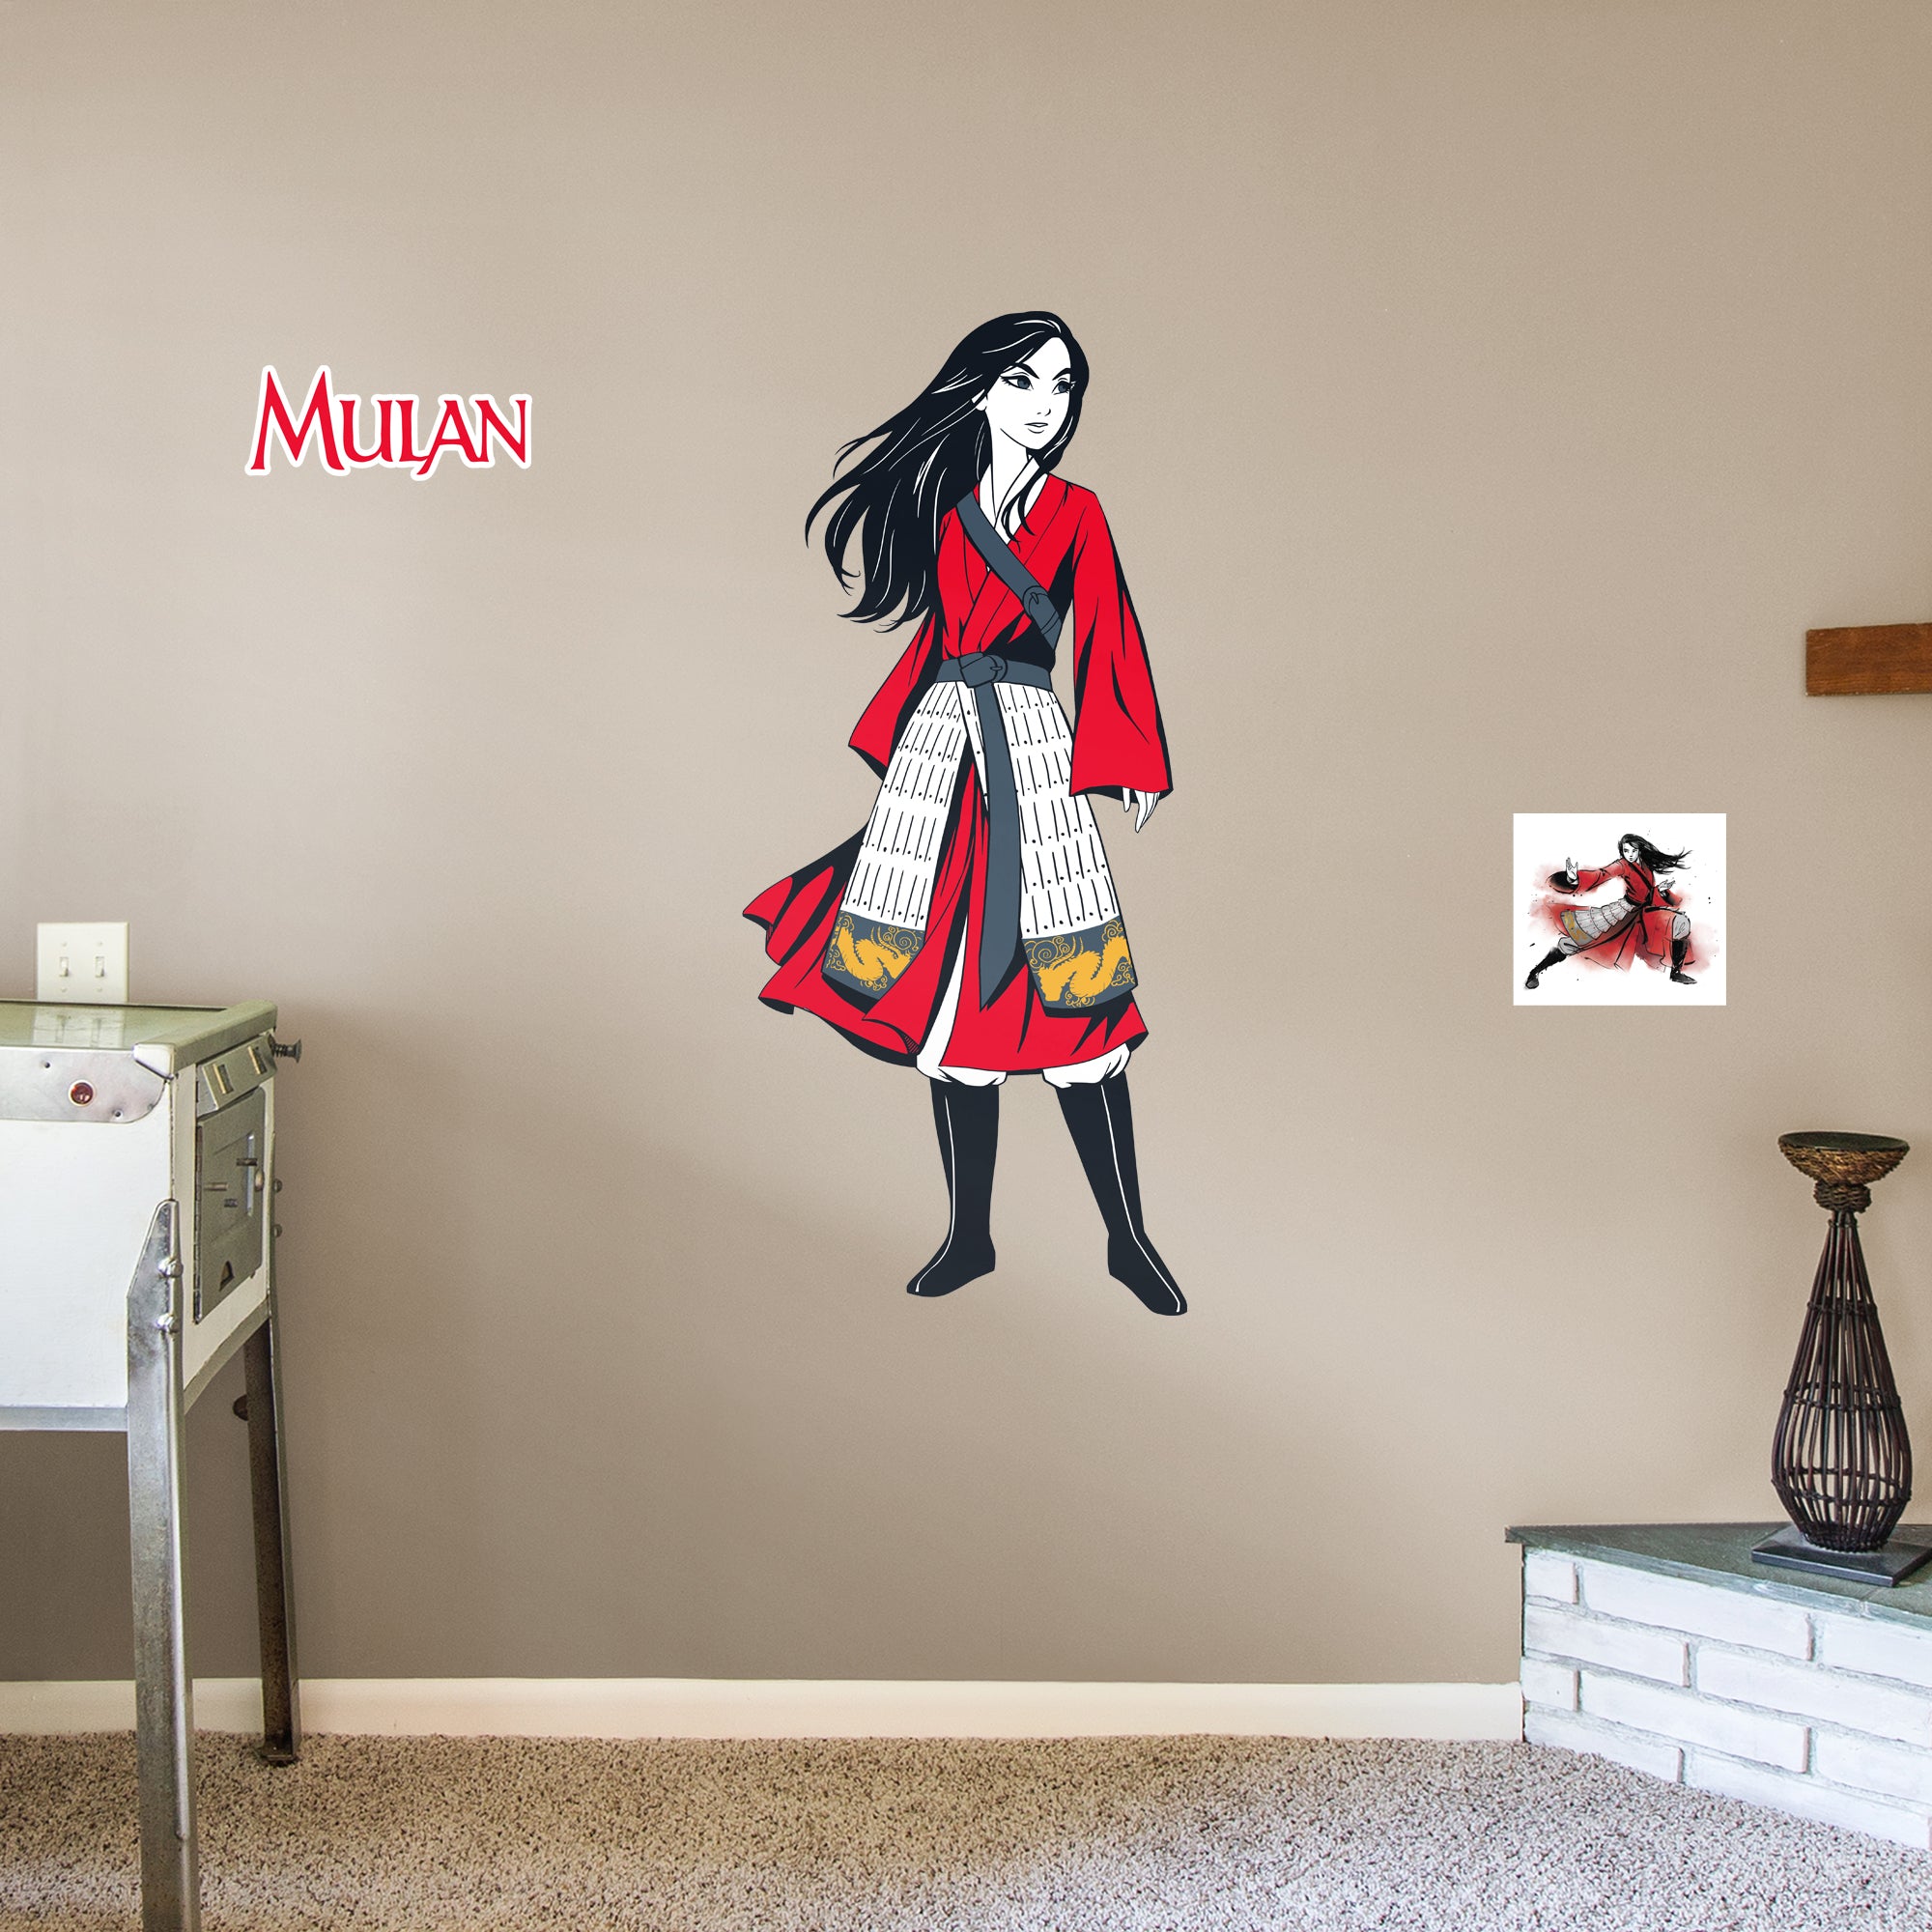 Mulan - Illustrated-Officially Licensed Disney Removable Wall Decal Giant Size + 2 Decals by Fathead | Vinyl